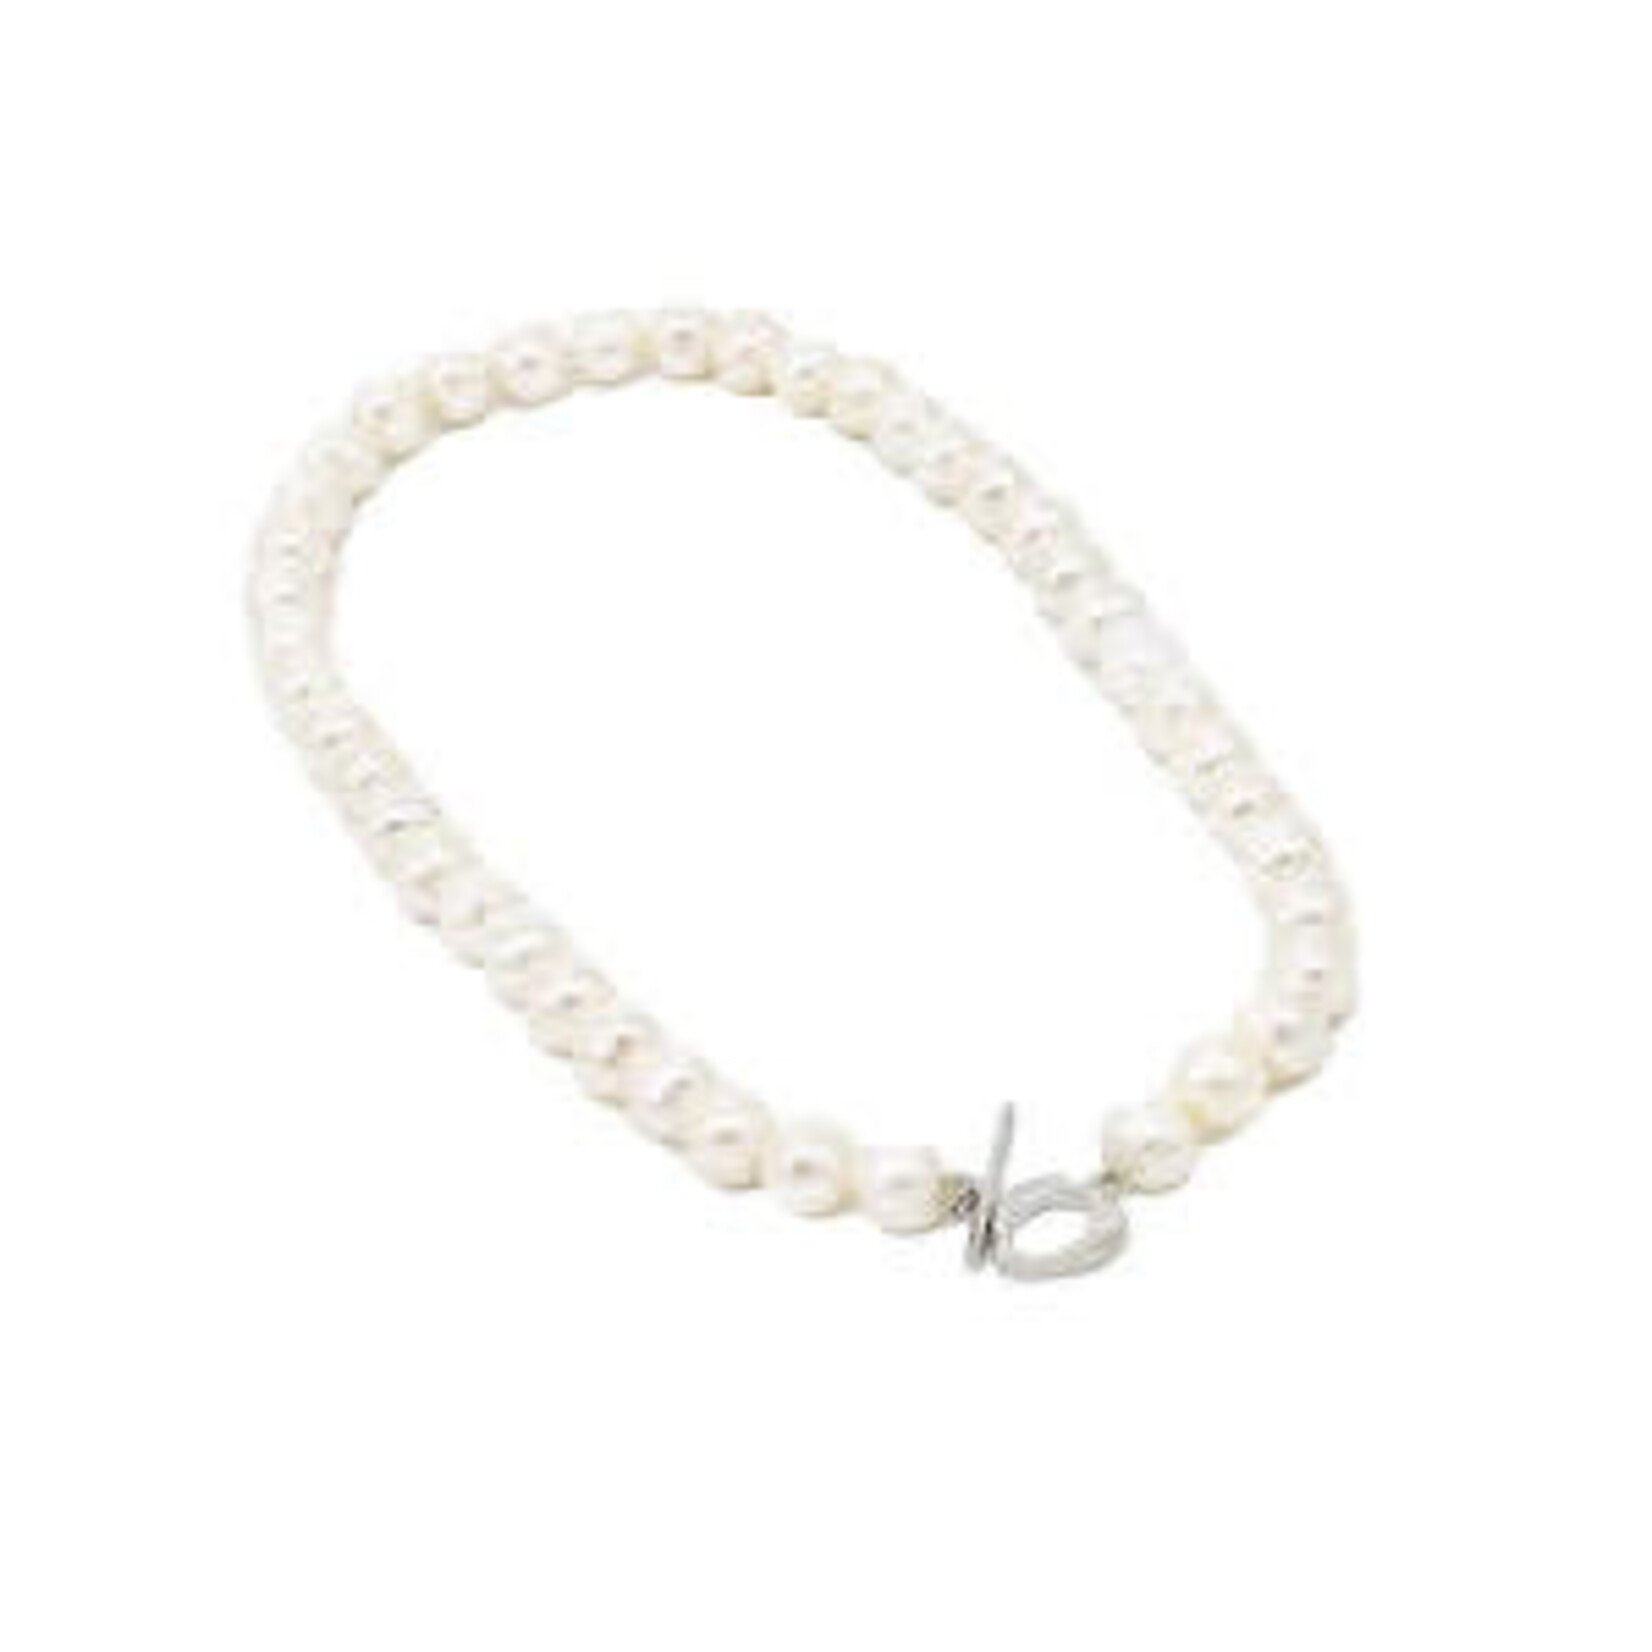 18" 10mm Pearl Necklace with Heart Toggle Clasp White